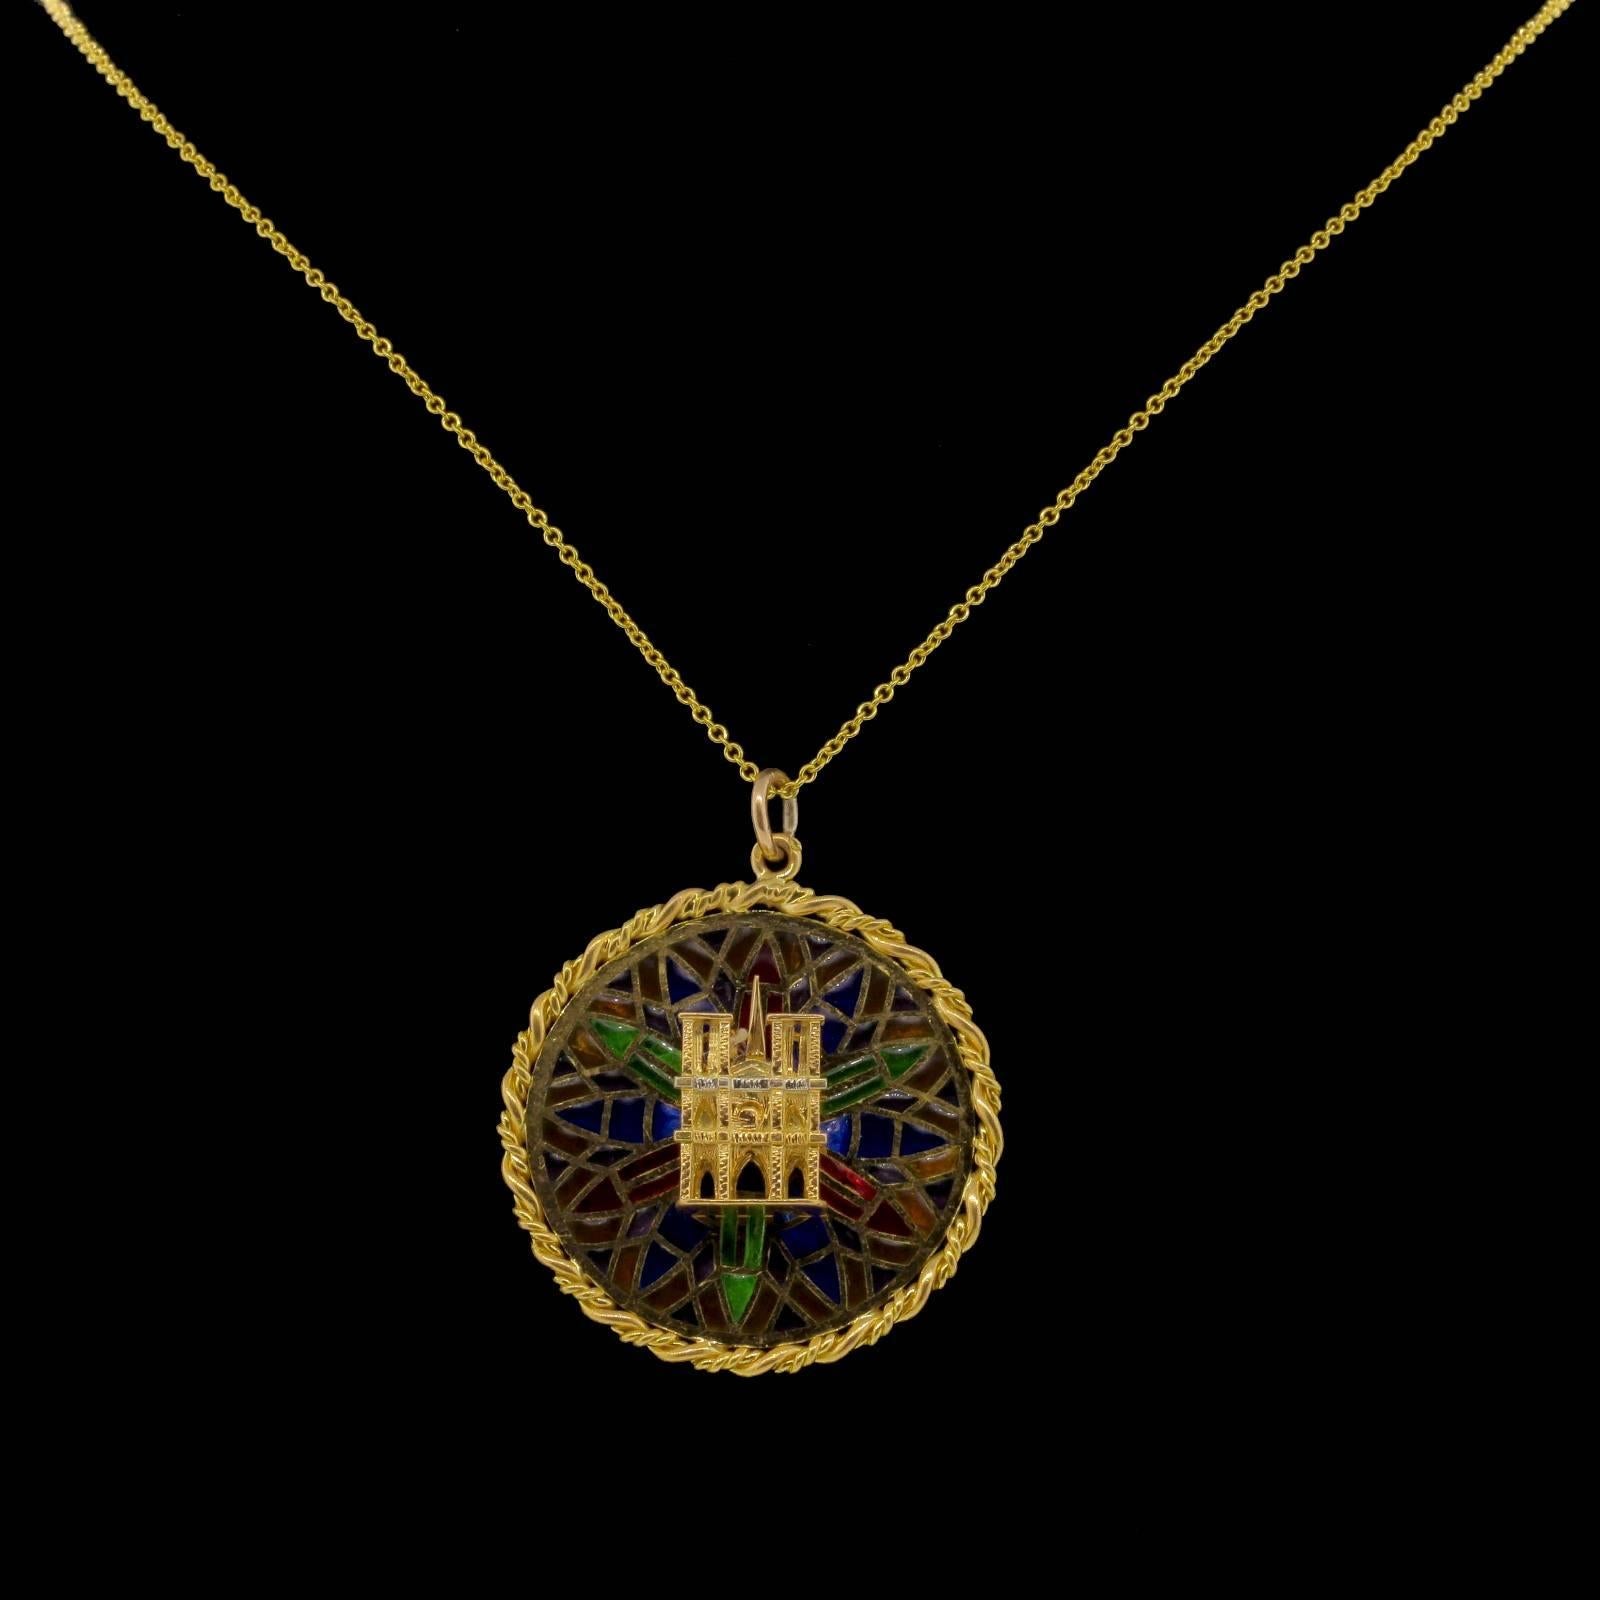 This vintage, Cartier French 18KT round charm/pendant features a luminous multicolor Plique-a-jour enamel, and centers a three dimensional representation of the iconic  Notre Dame Cathedral facade.  An intertwined rope borders the pendant.  The bail